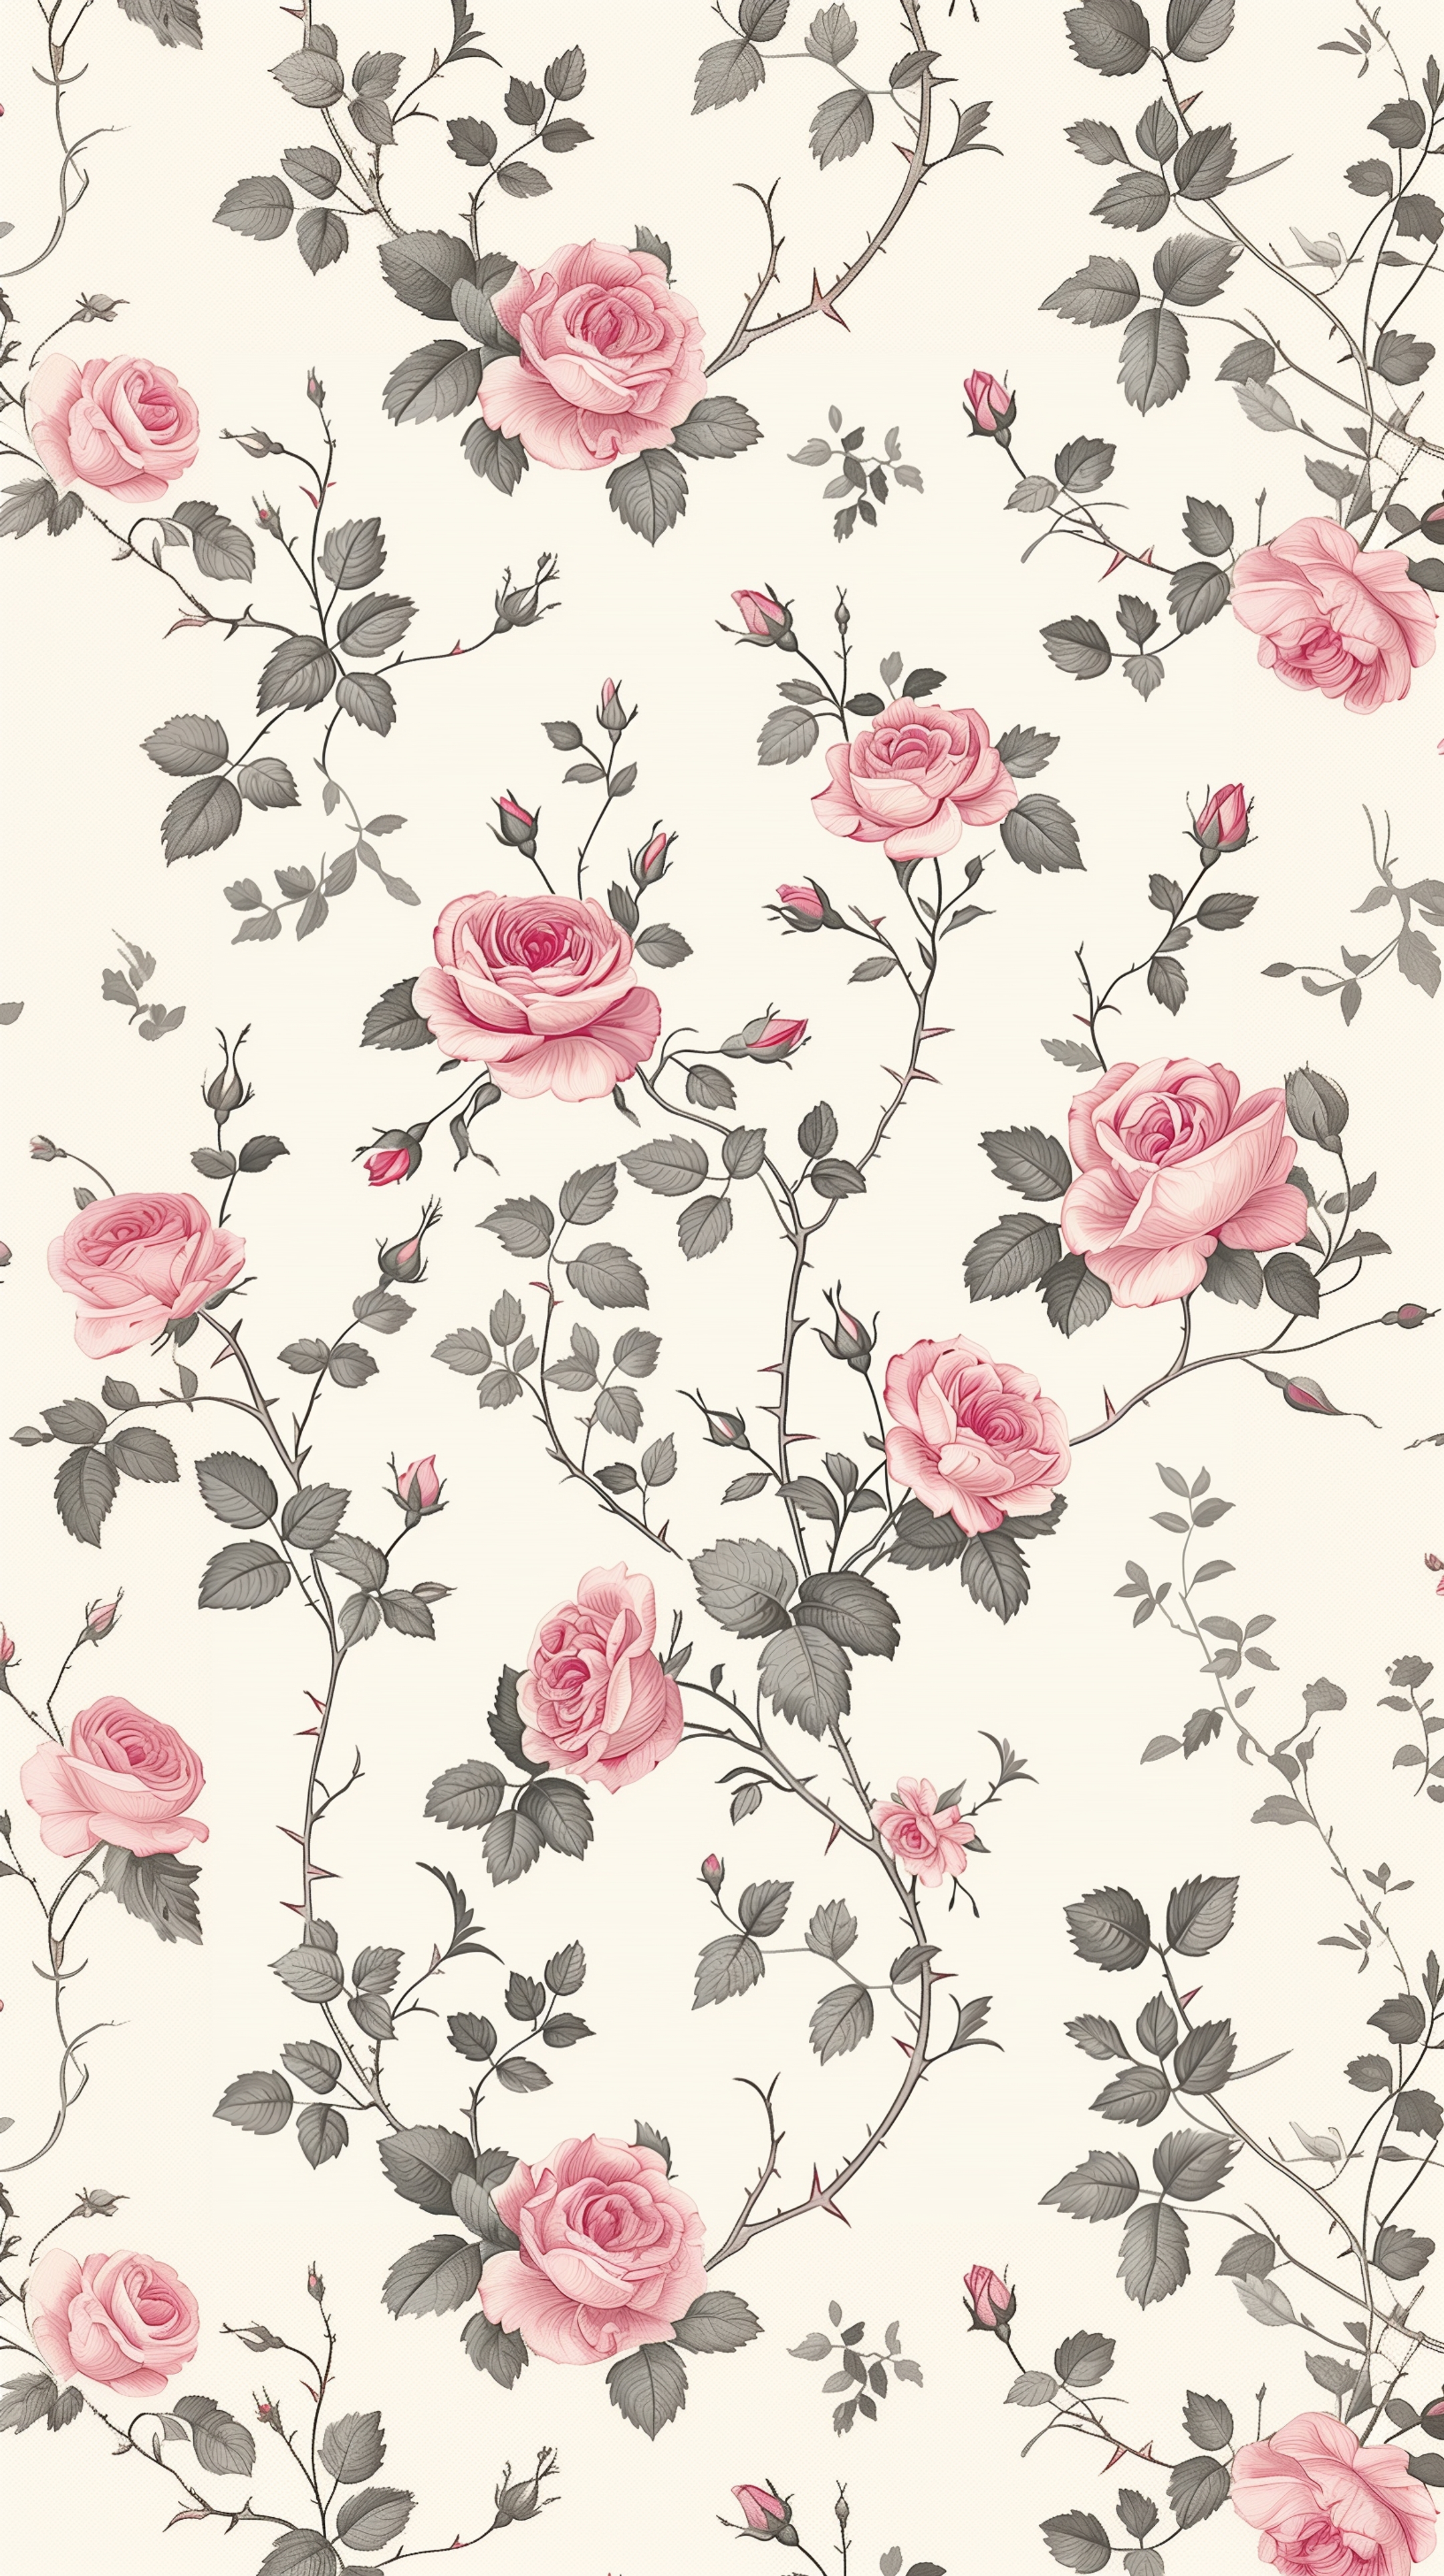 Elegant Pink Roses on a Pale Background Шпалери[e6d8c31f94974690a59b]